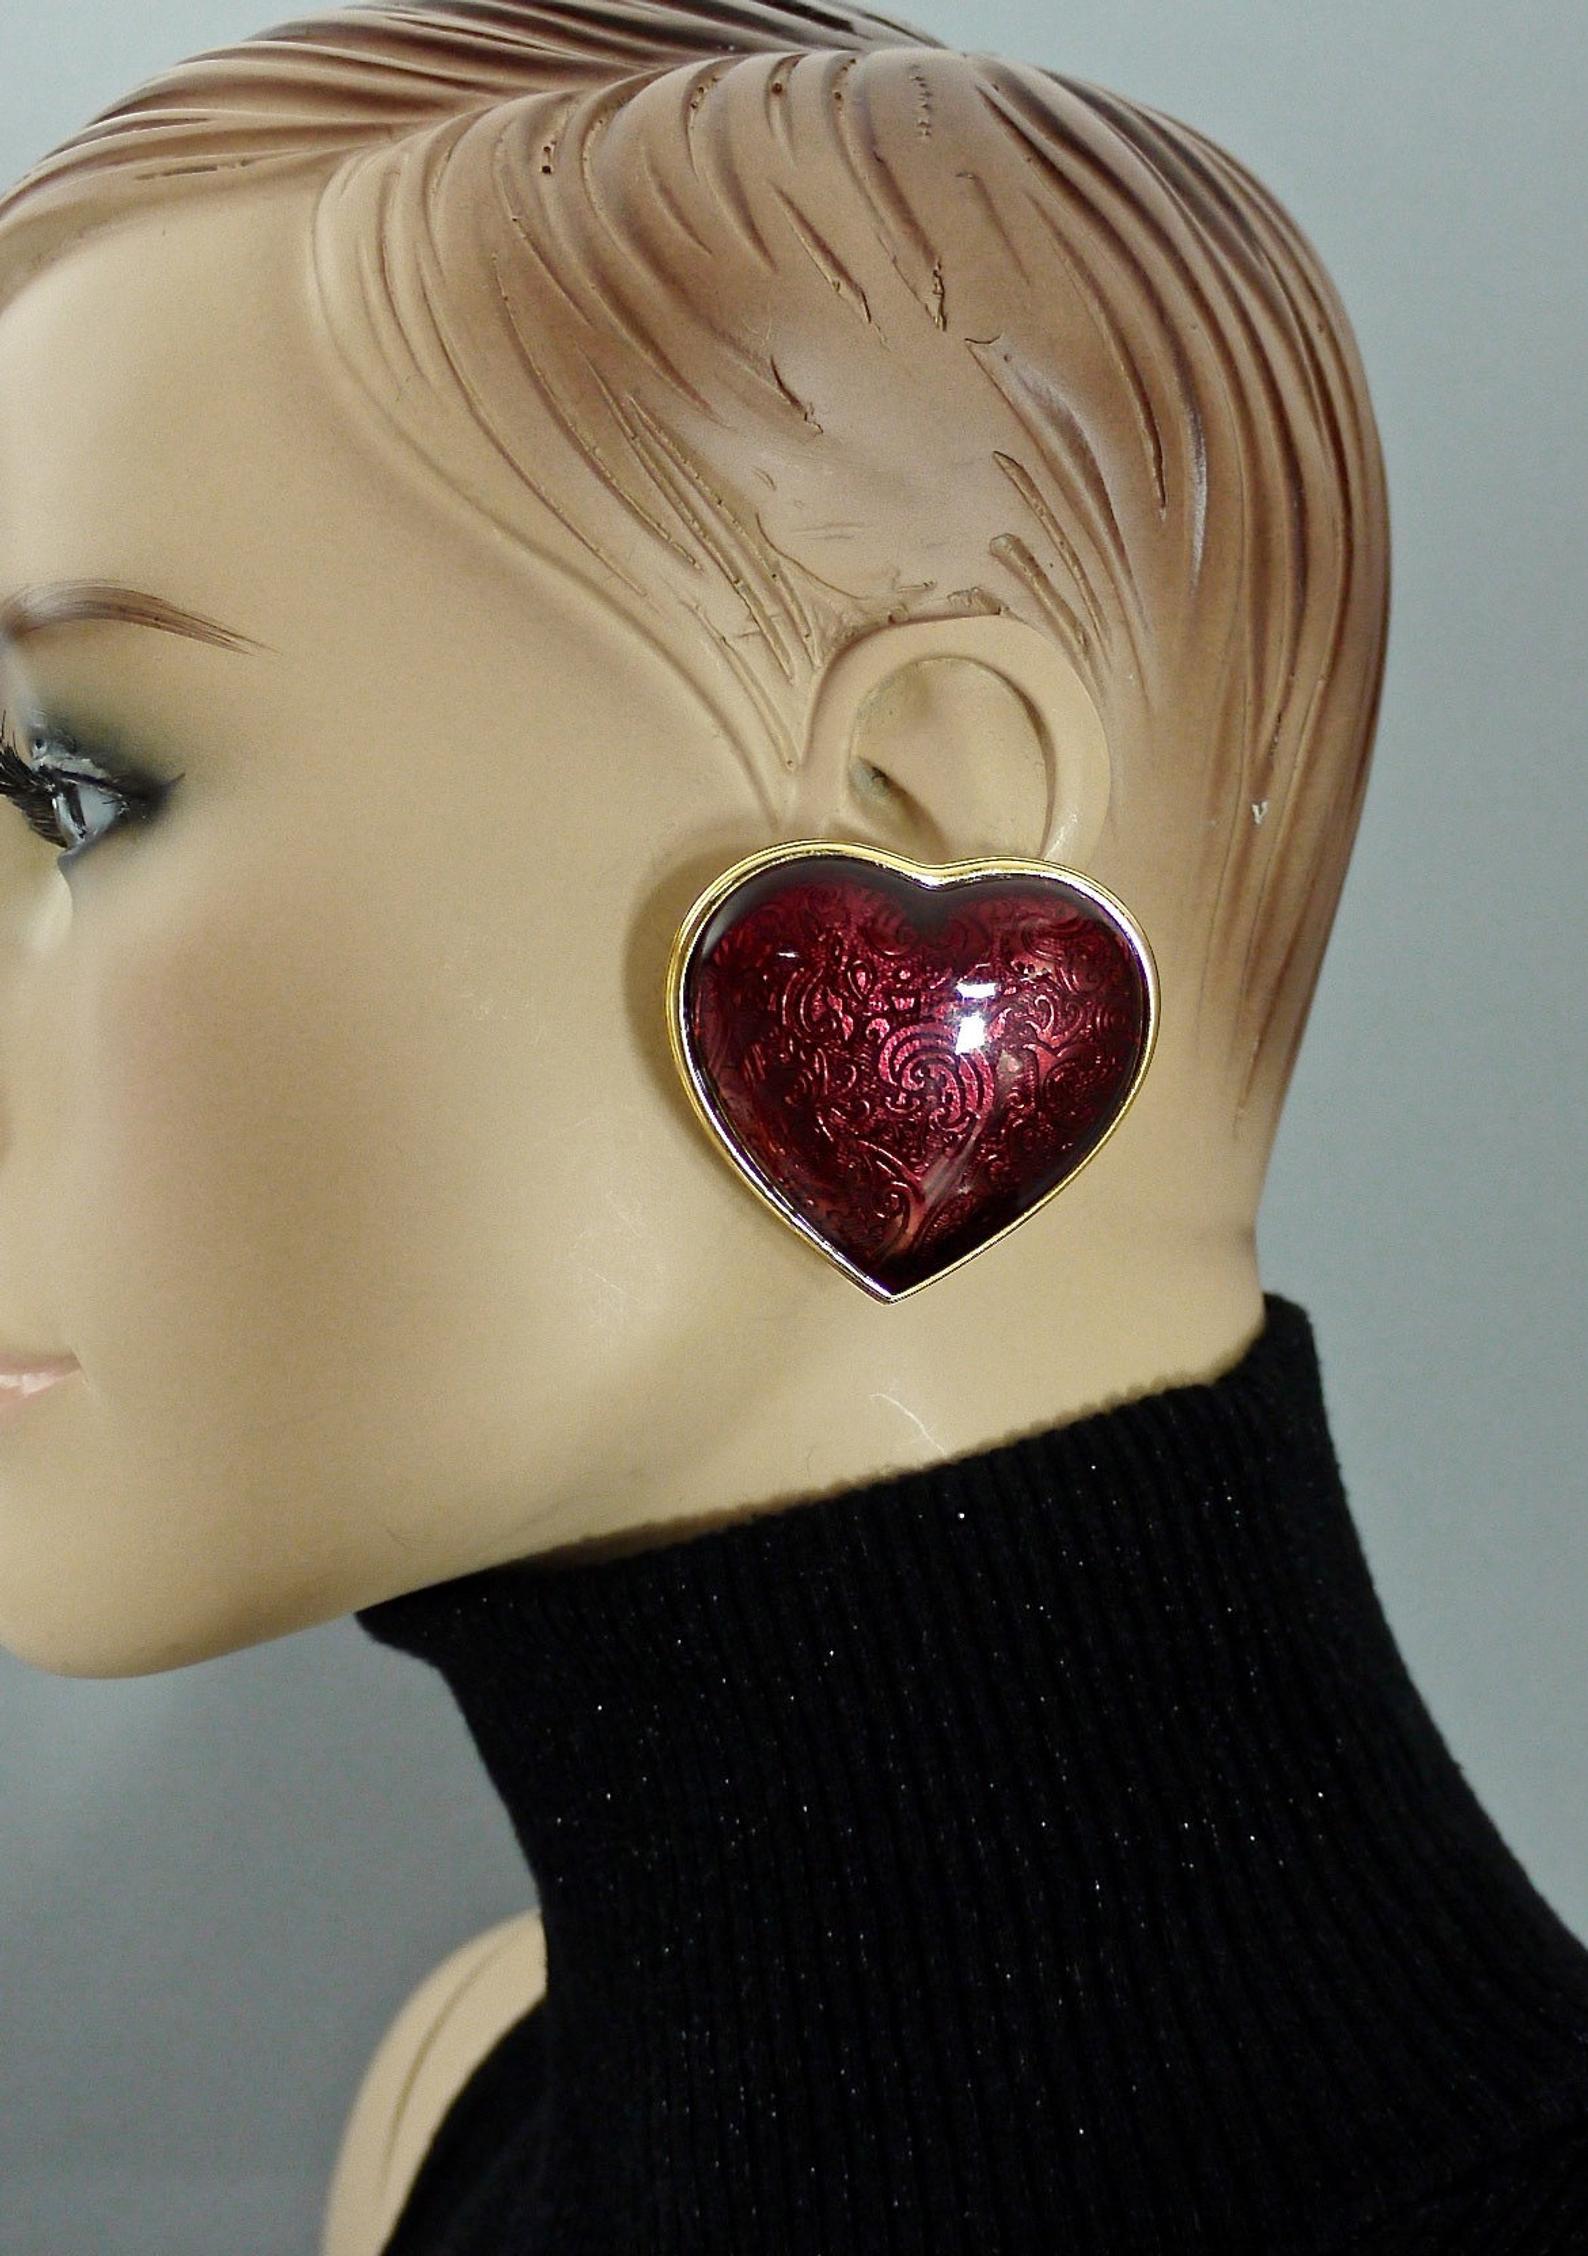 Vintage YVES SAINT LAURENT Arabesque Enamel Red Heart Earrings

Measurements:
Height: 1.92 inches (4.9 cm)
Width: 2 inches (5.1 cm)
Weight per Earring: 30 grams

Features:
- 100% Authentic YVES SAINT LAURENT.
- Massive red heart enamel with